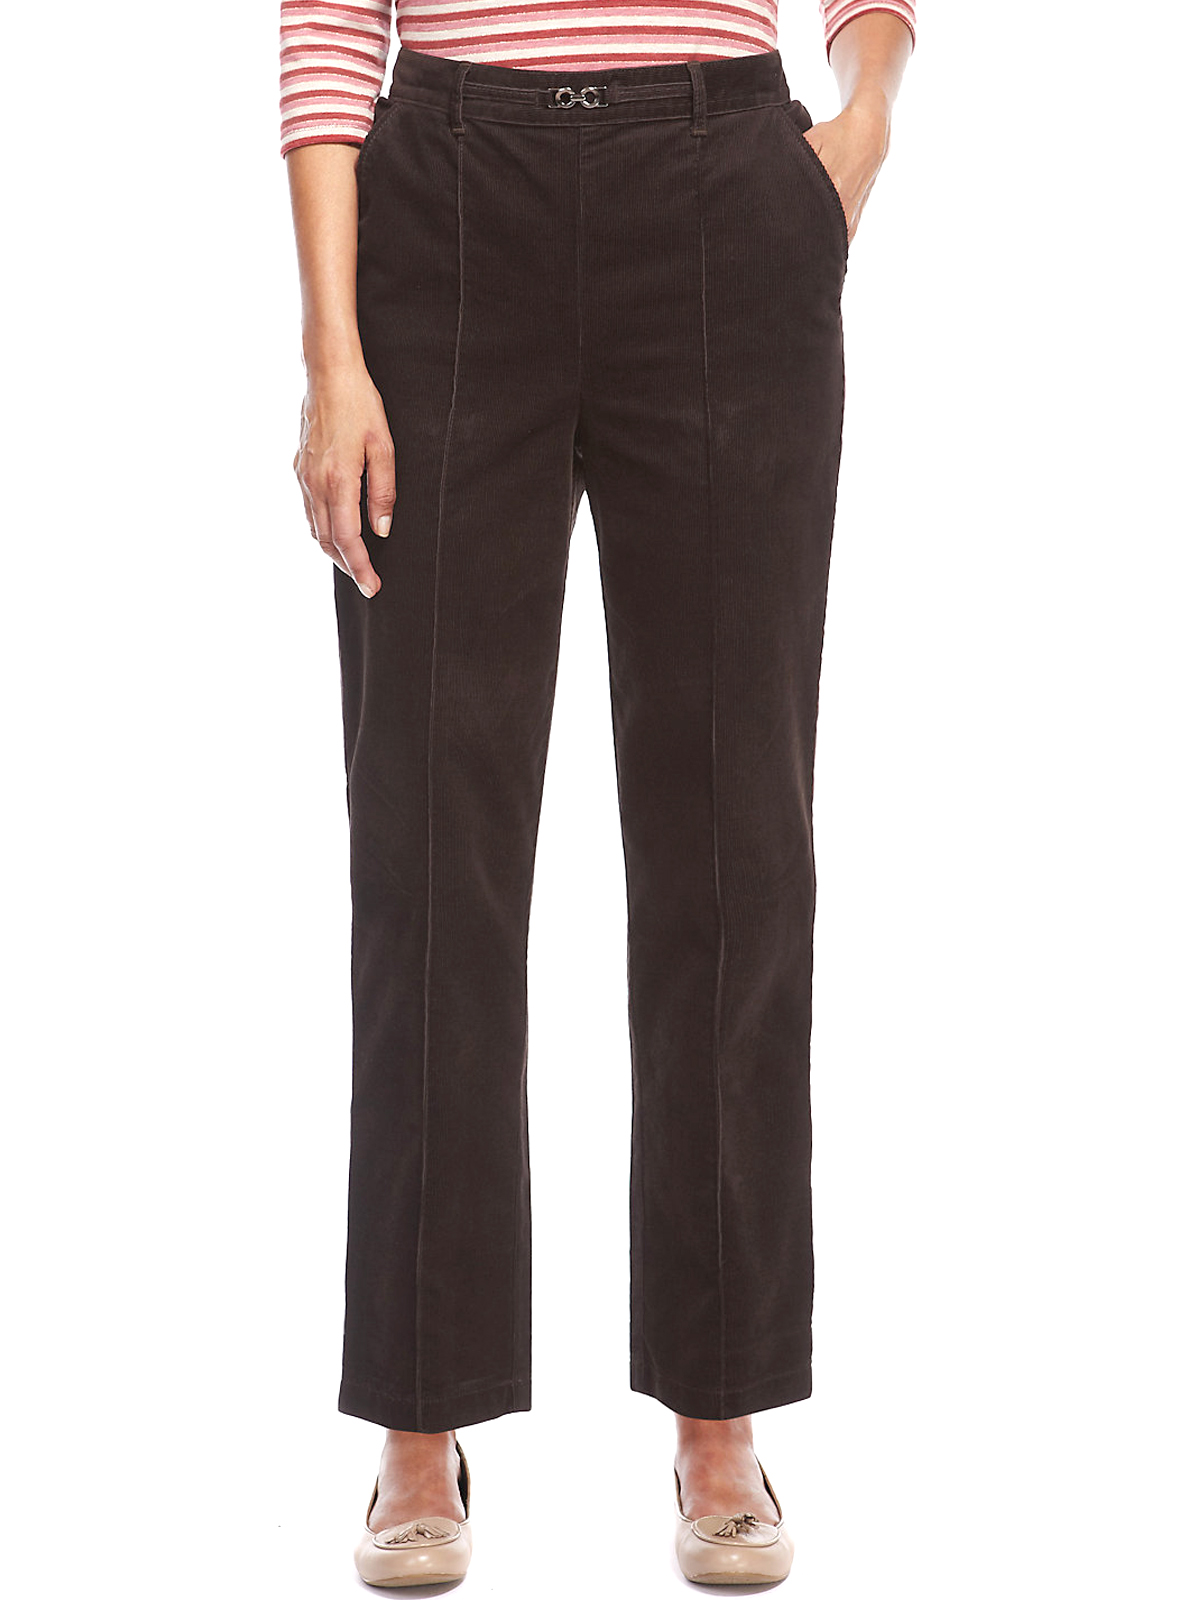 Marks and Spencer - - M&5 CHOCOLATE Cotton Rich Corduroy Trousers - Size 14